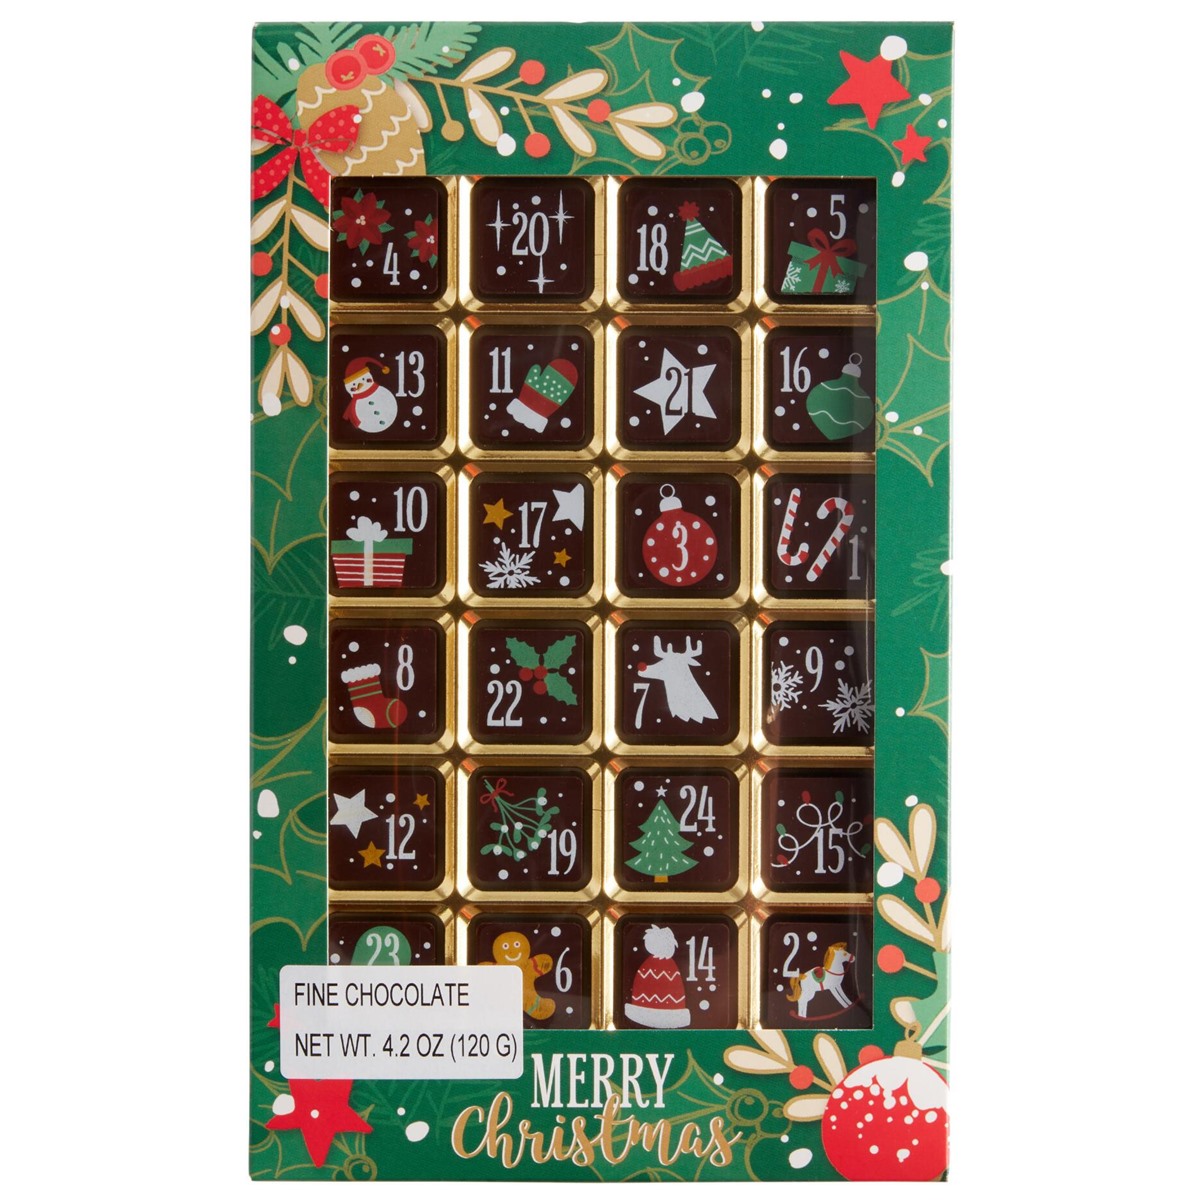 Dairy-Free Advent Calendars - A Full Round-Up with Vegan, Gluten-Free, Nut-Free, & Soy-Free Options, too!